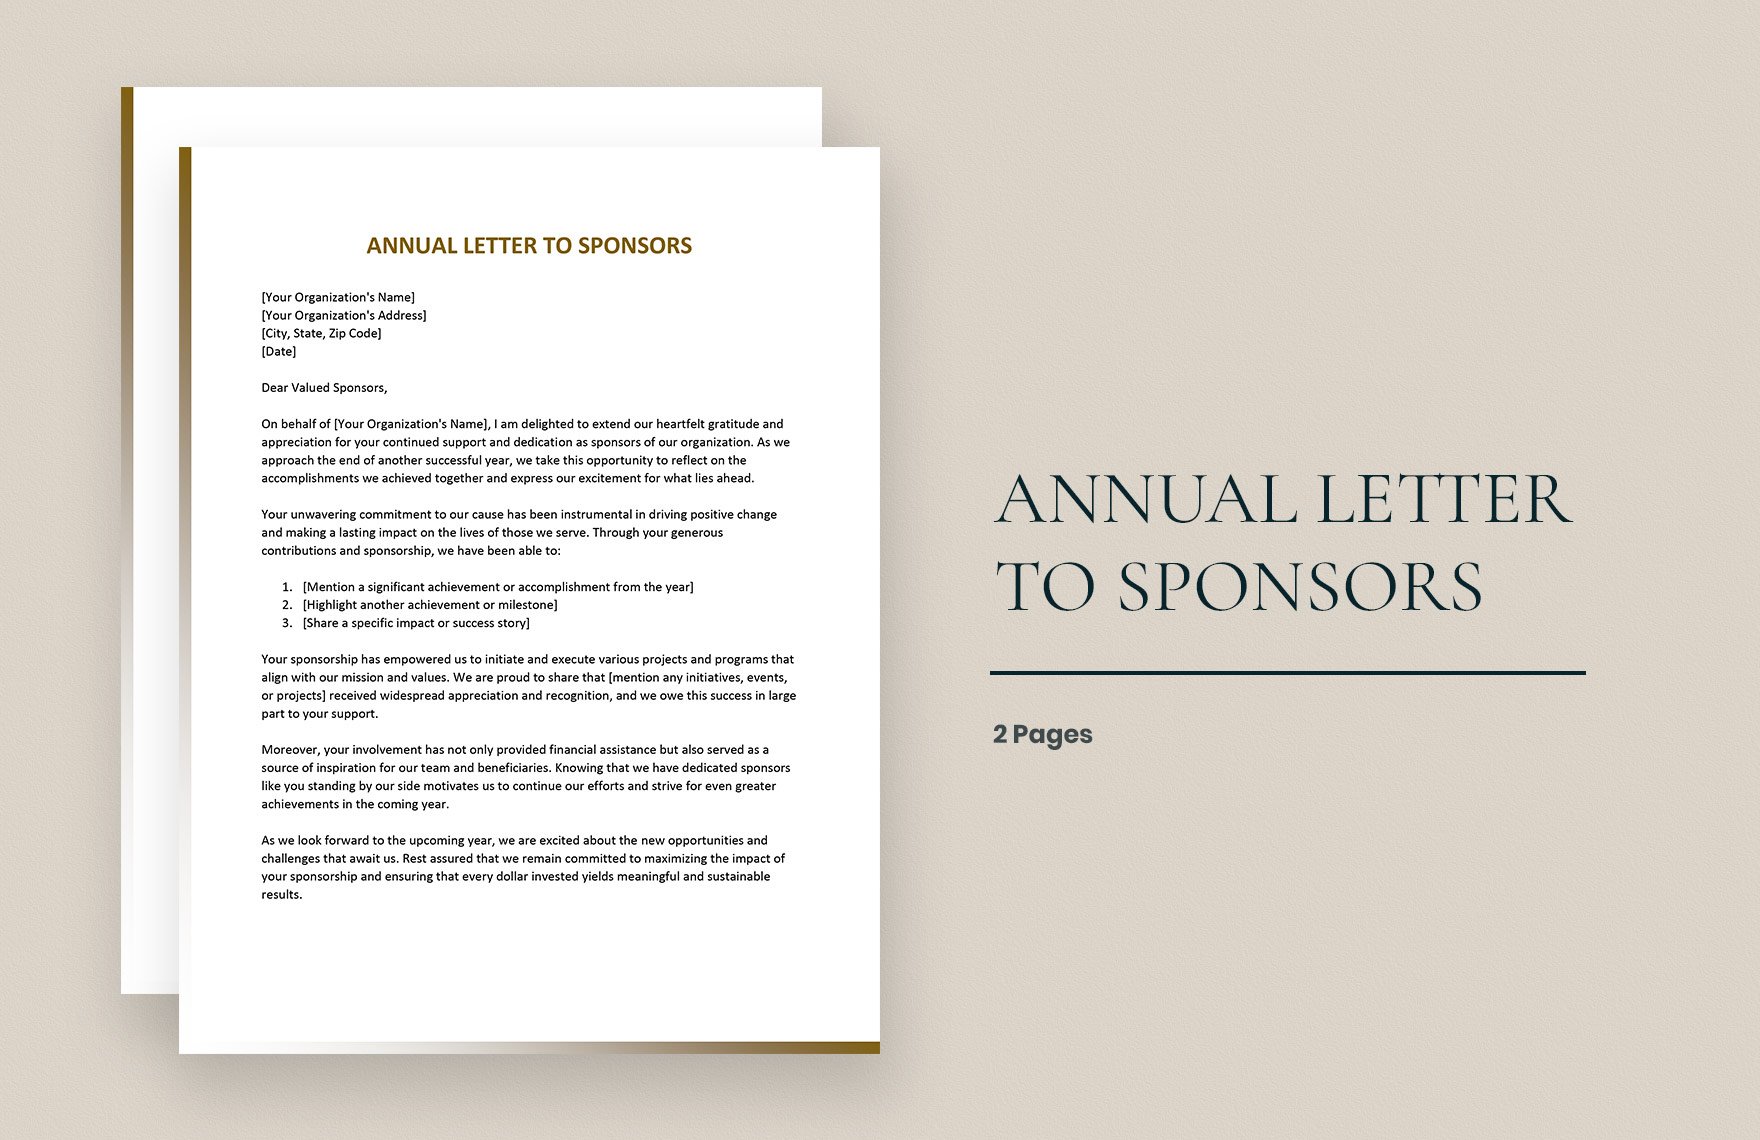 Annual Letter to Sponsors in Word, Google Docs, Apple Pages